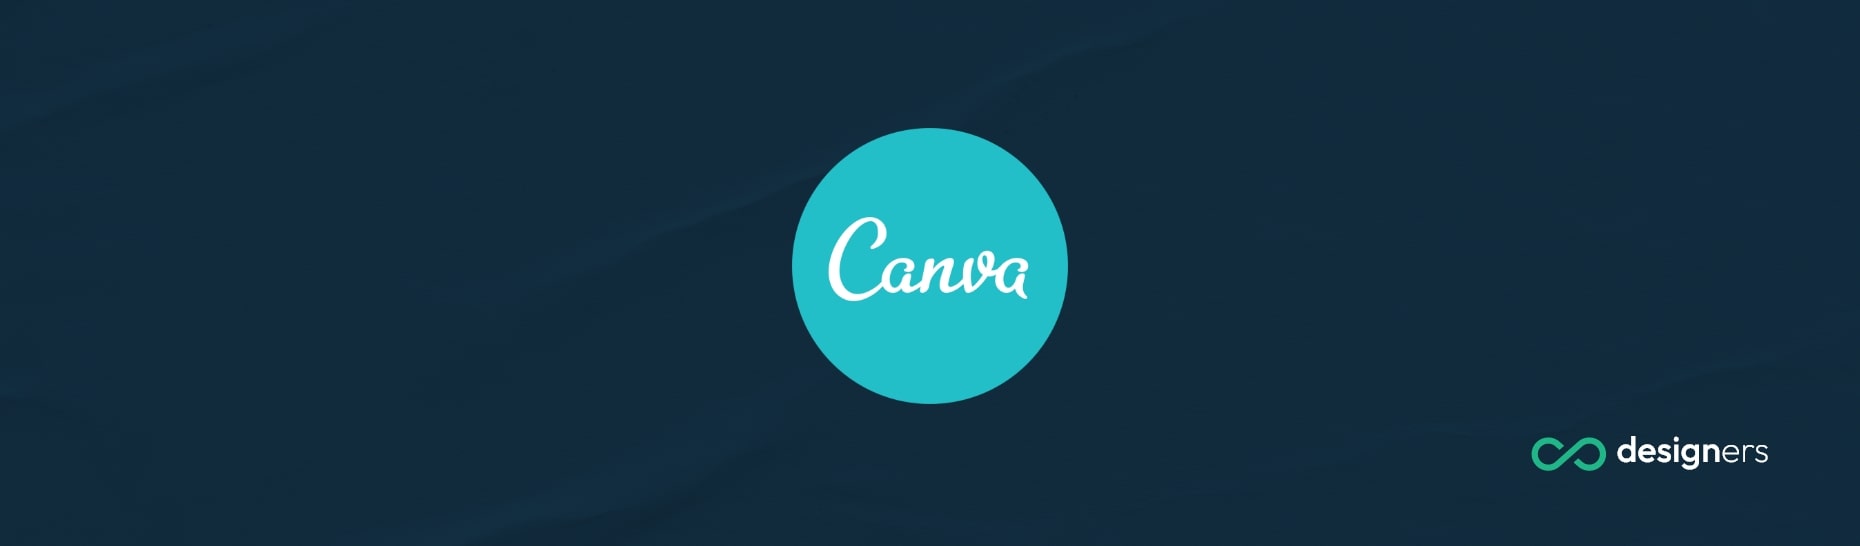 How Do I Get Free Canva Pro Forever?